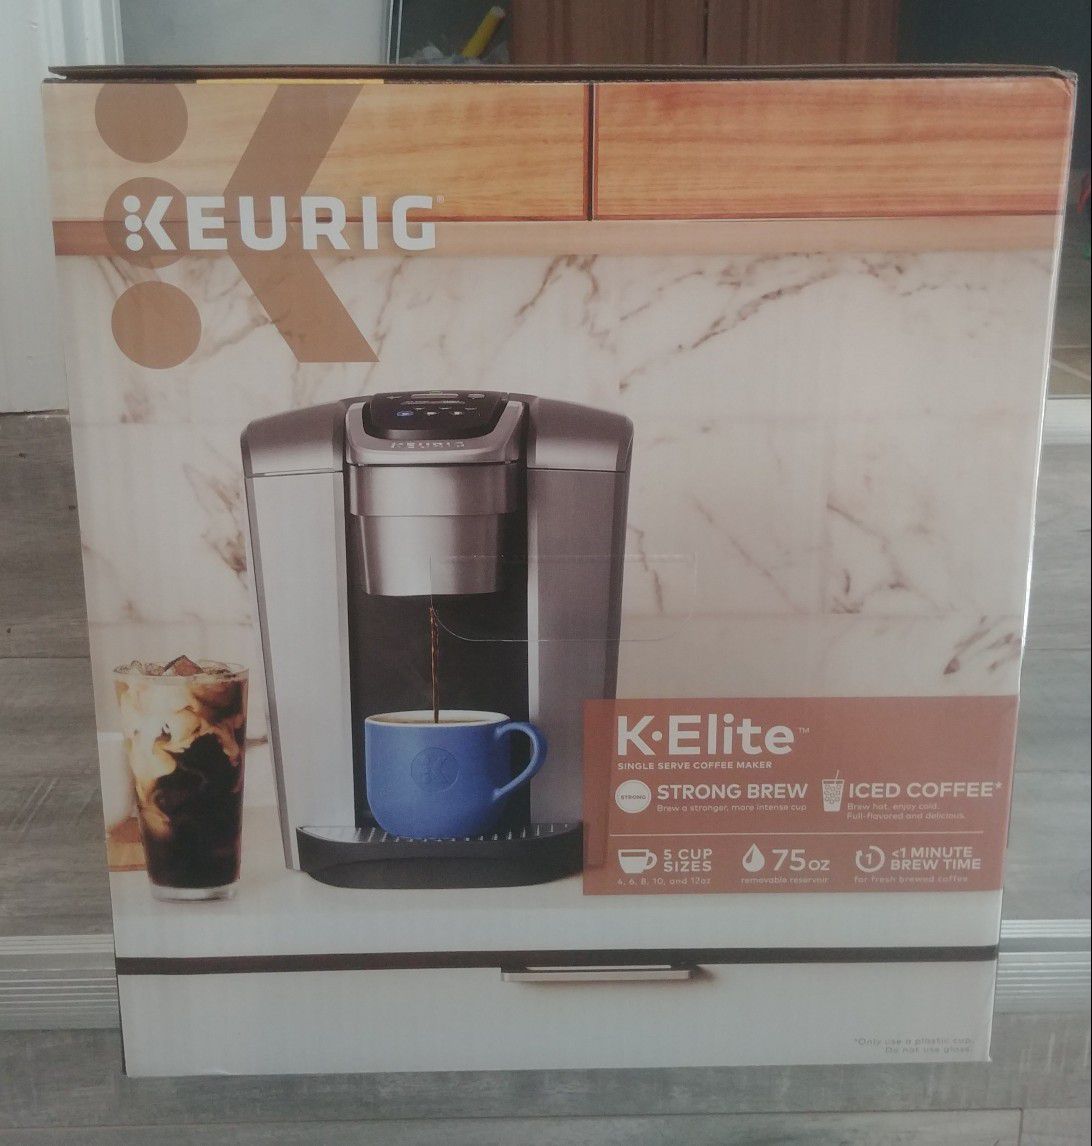 Keurig K-Elite Coffee Maker, Single Serve K-Cup Pod Coffee Brewer, with Ice Coffee Cabability